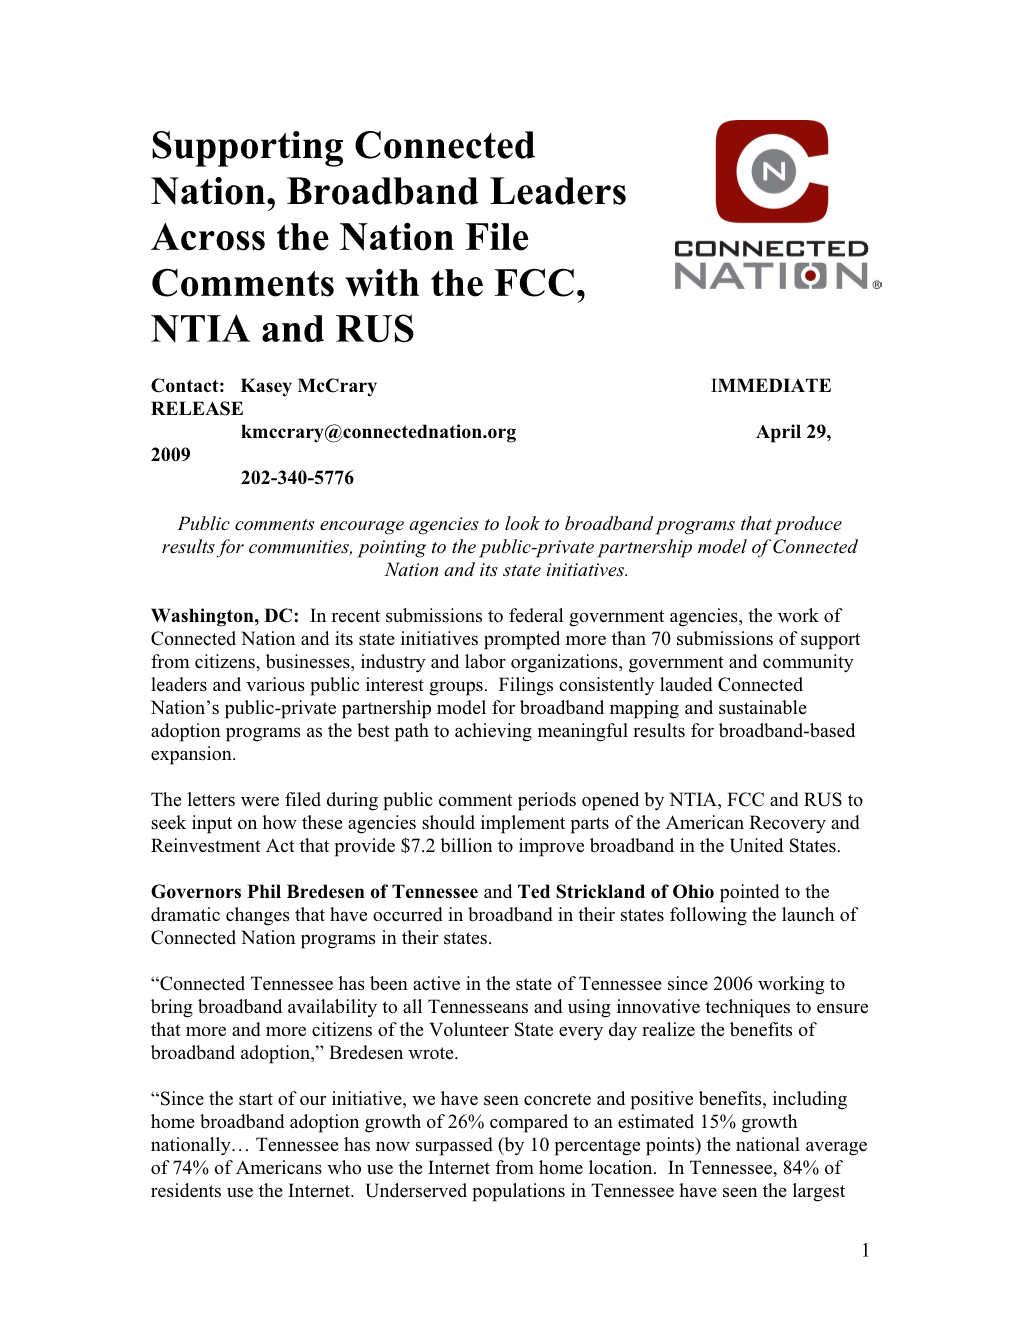 Dozens of Letters in Support of Connected Nation S Work Submitted to NTIA